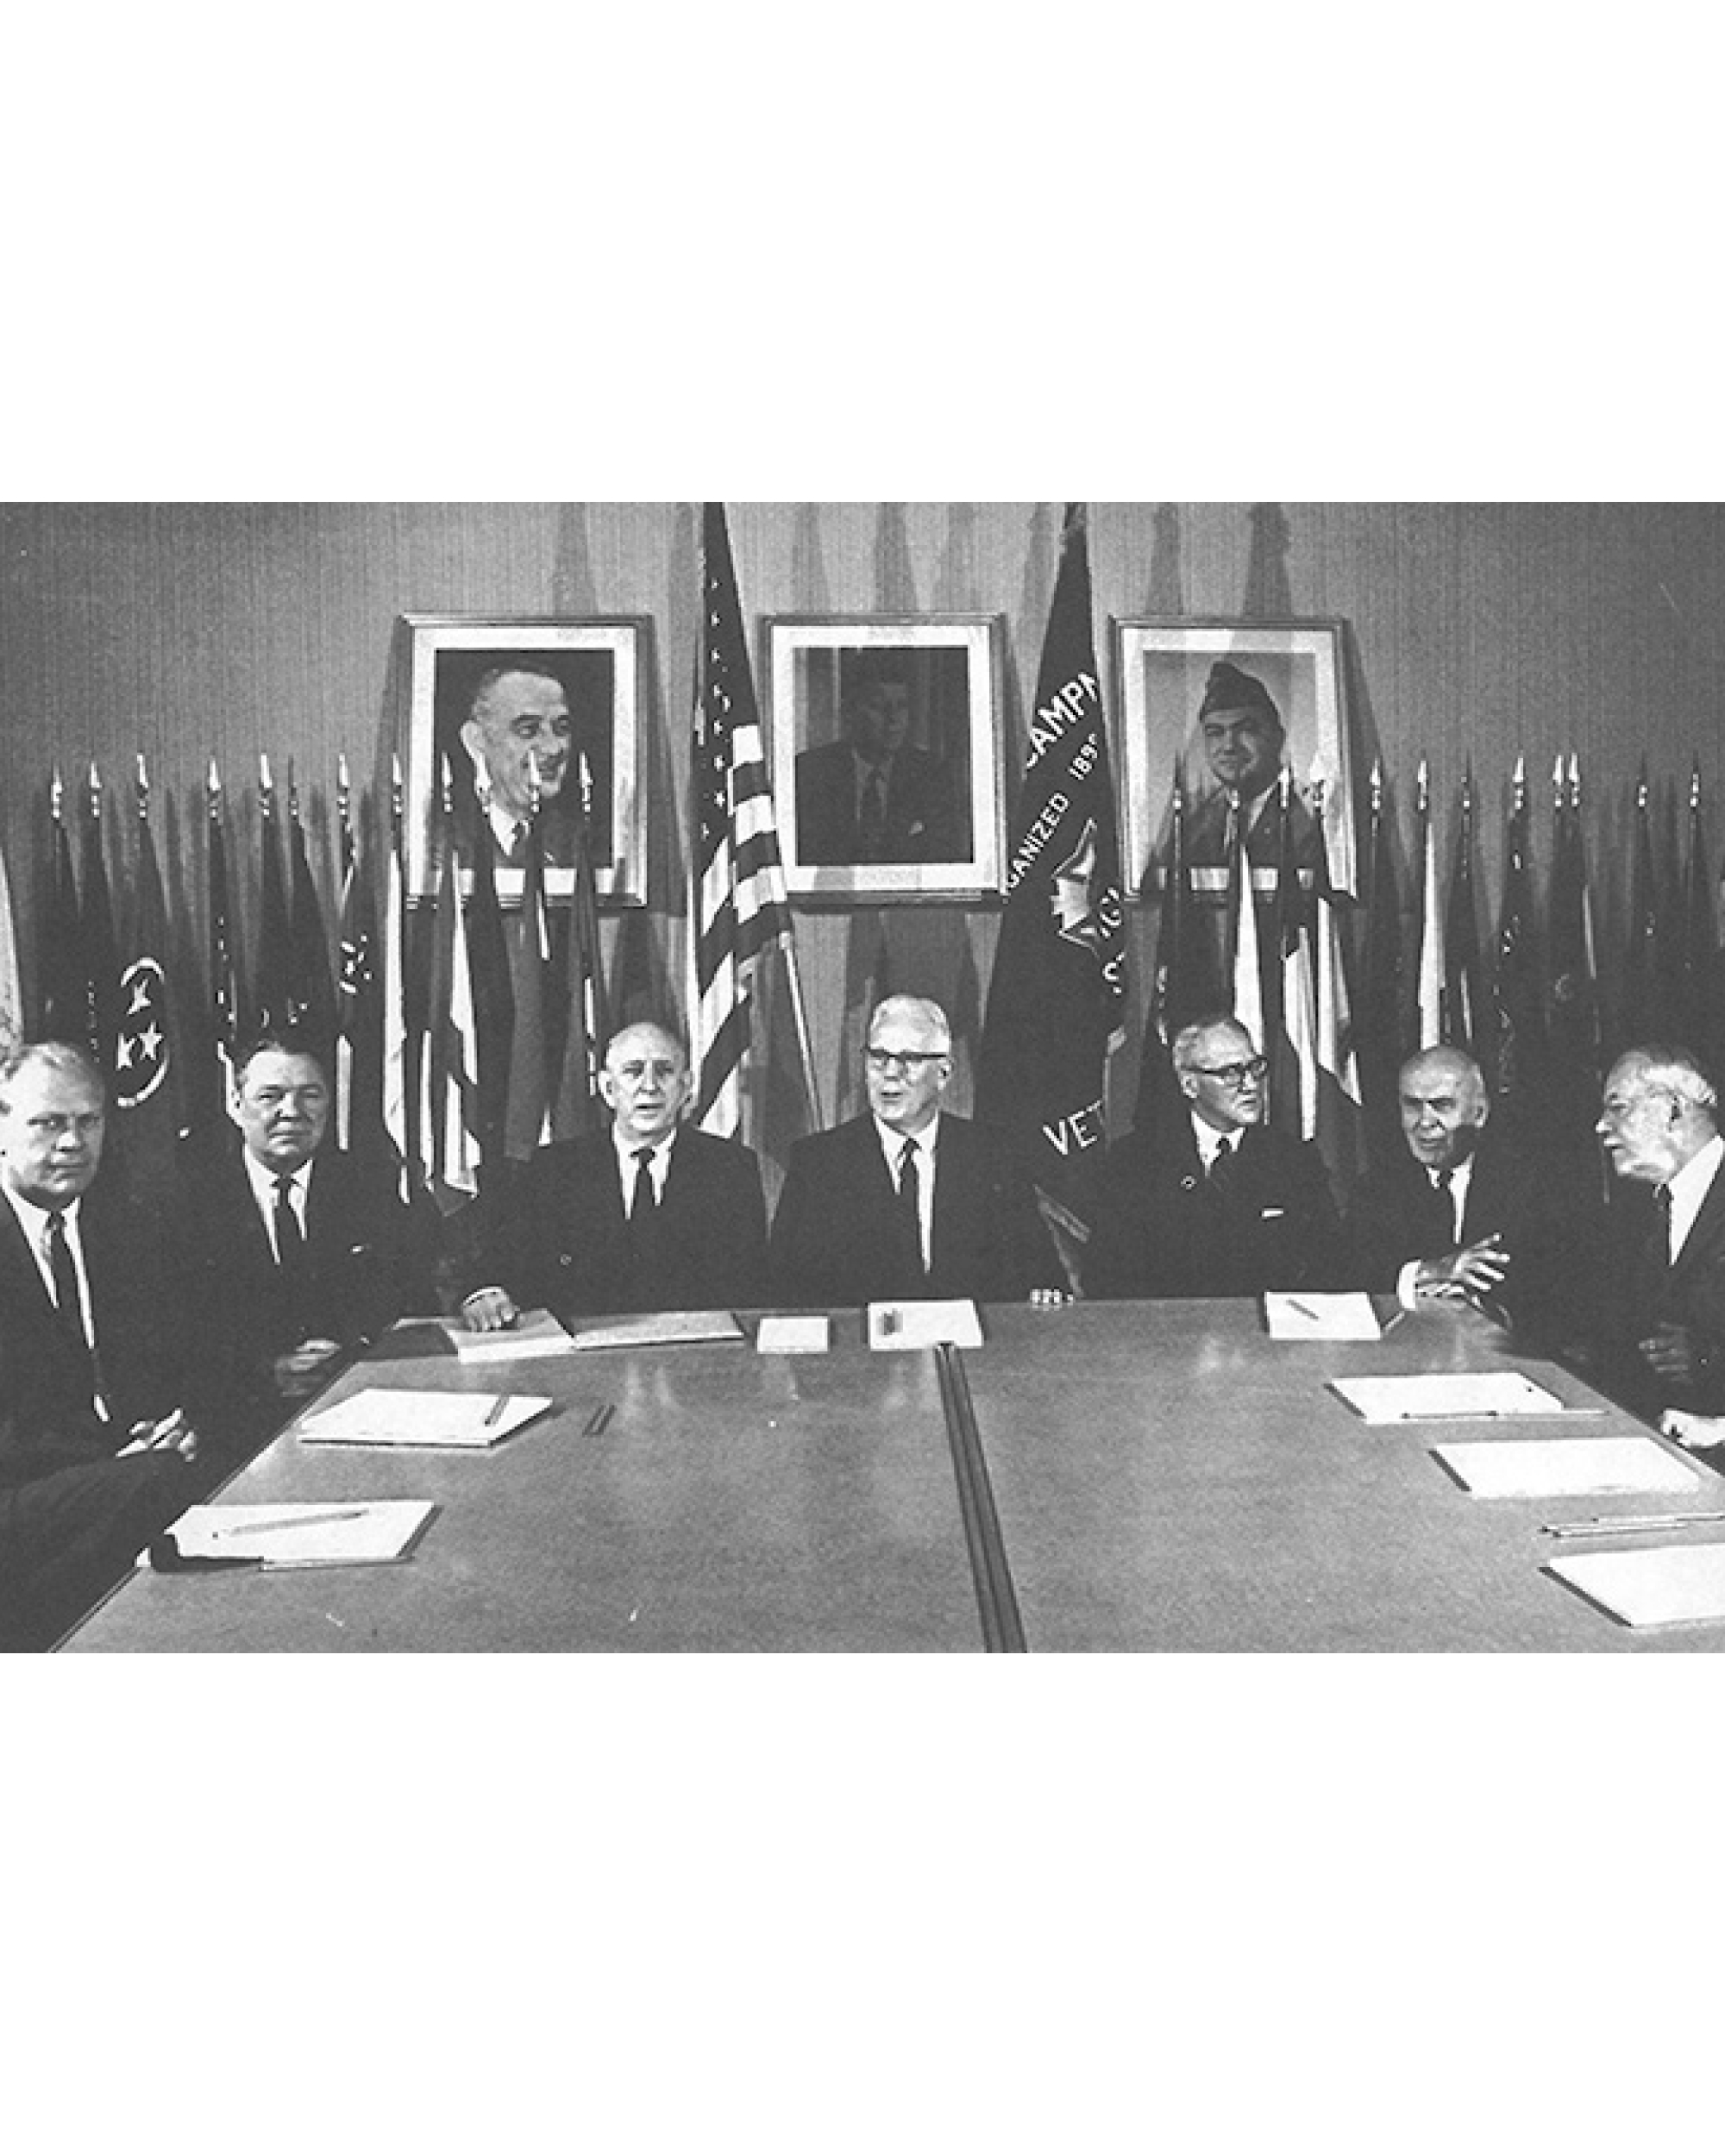 Members of the Warren Commission, assembled by President Johnson and headed by Chief Justice Earl Warren (center).